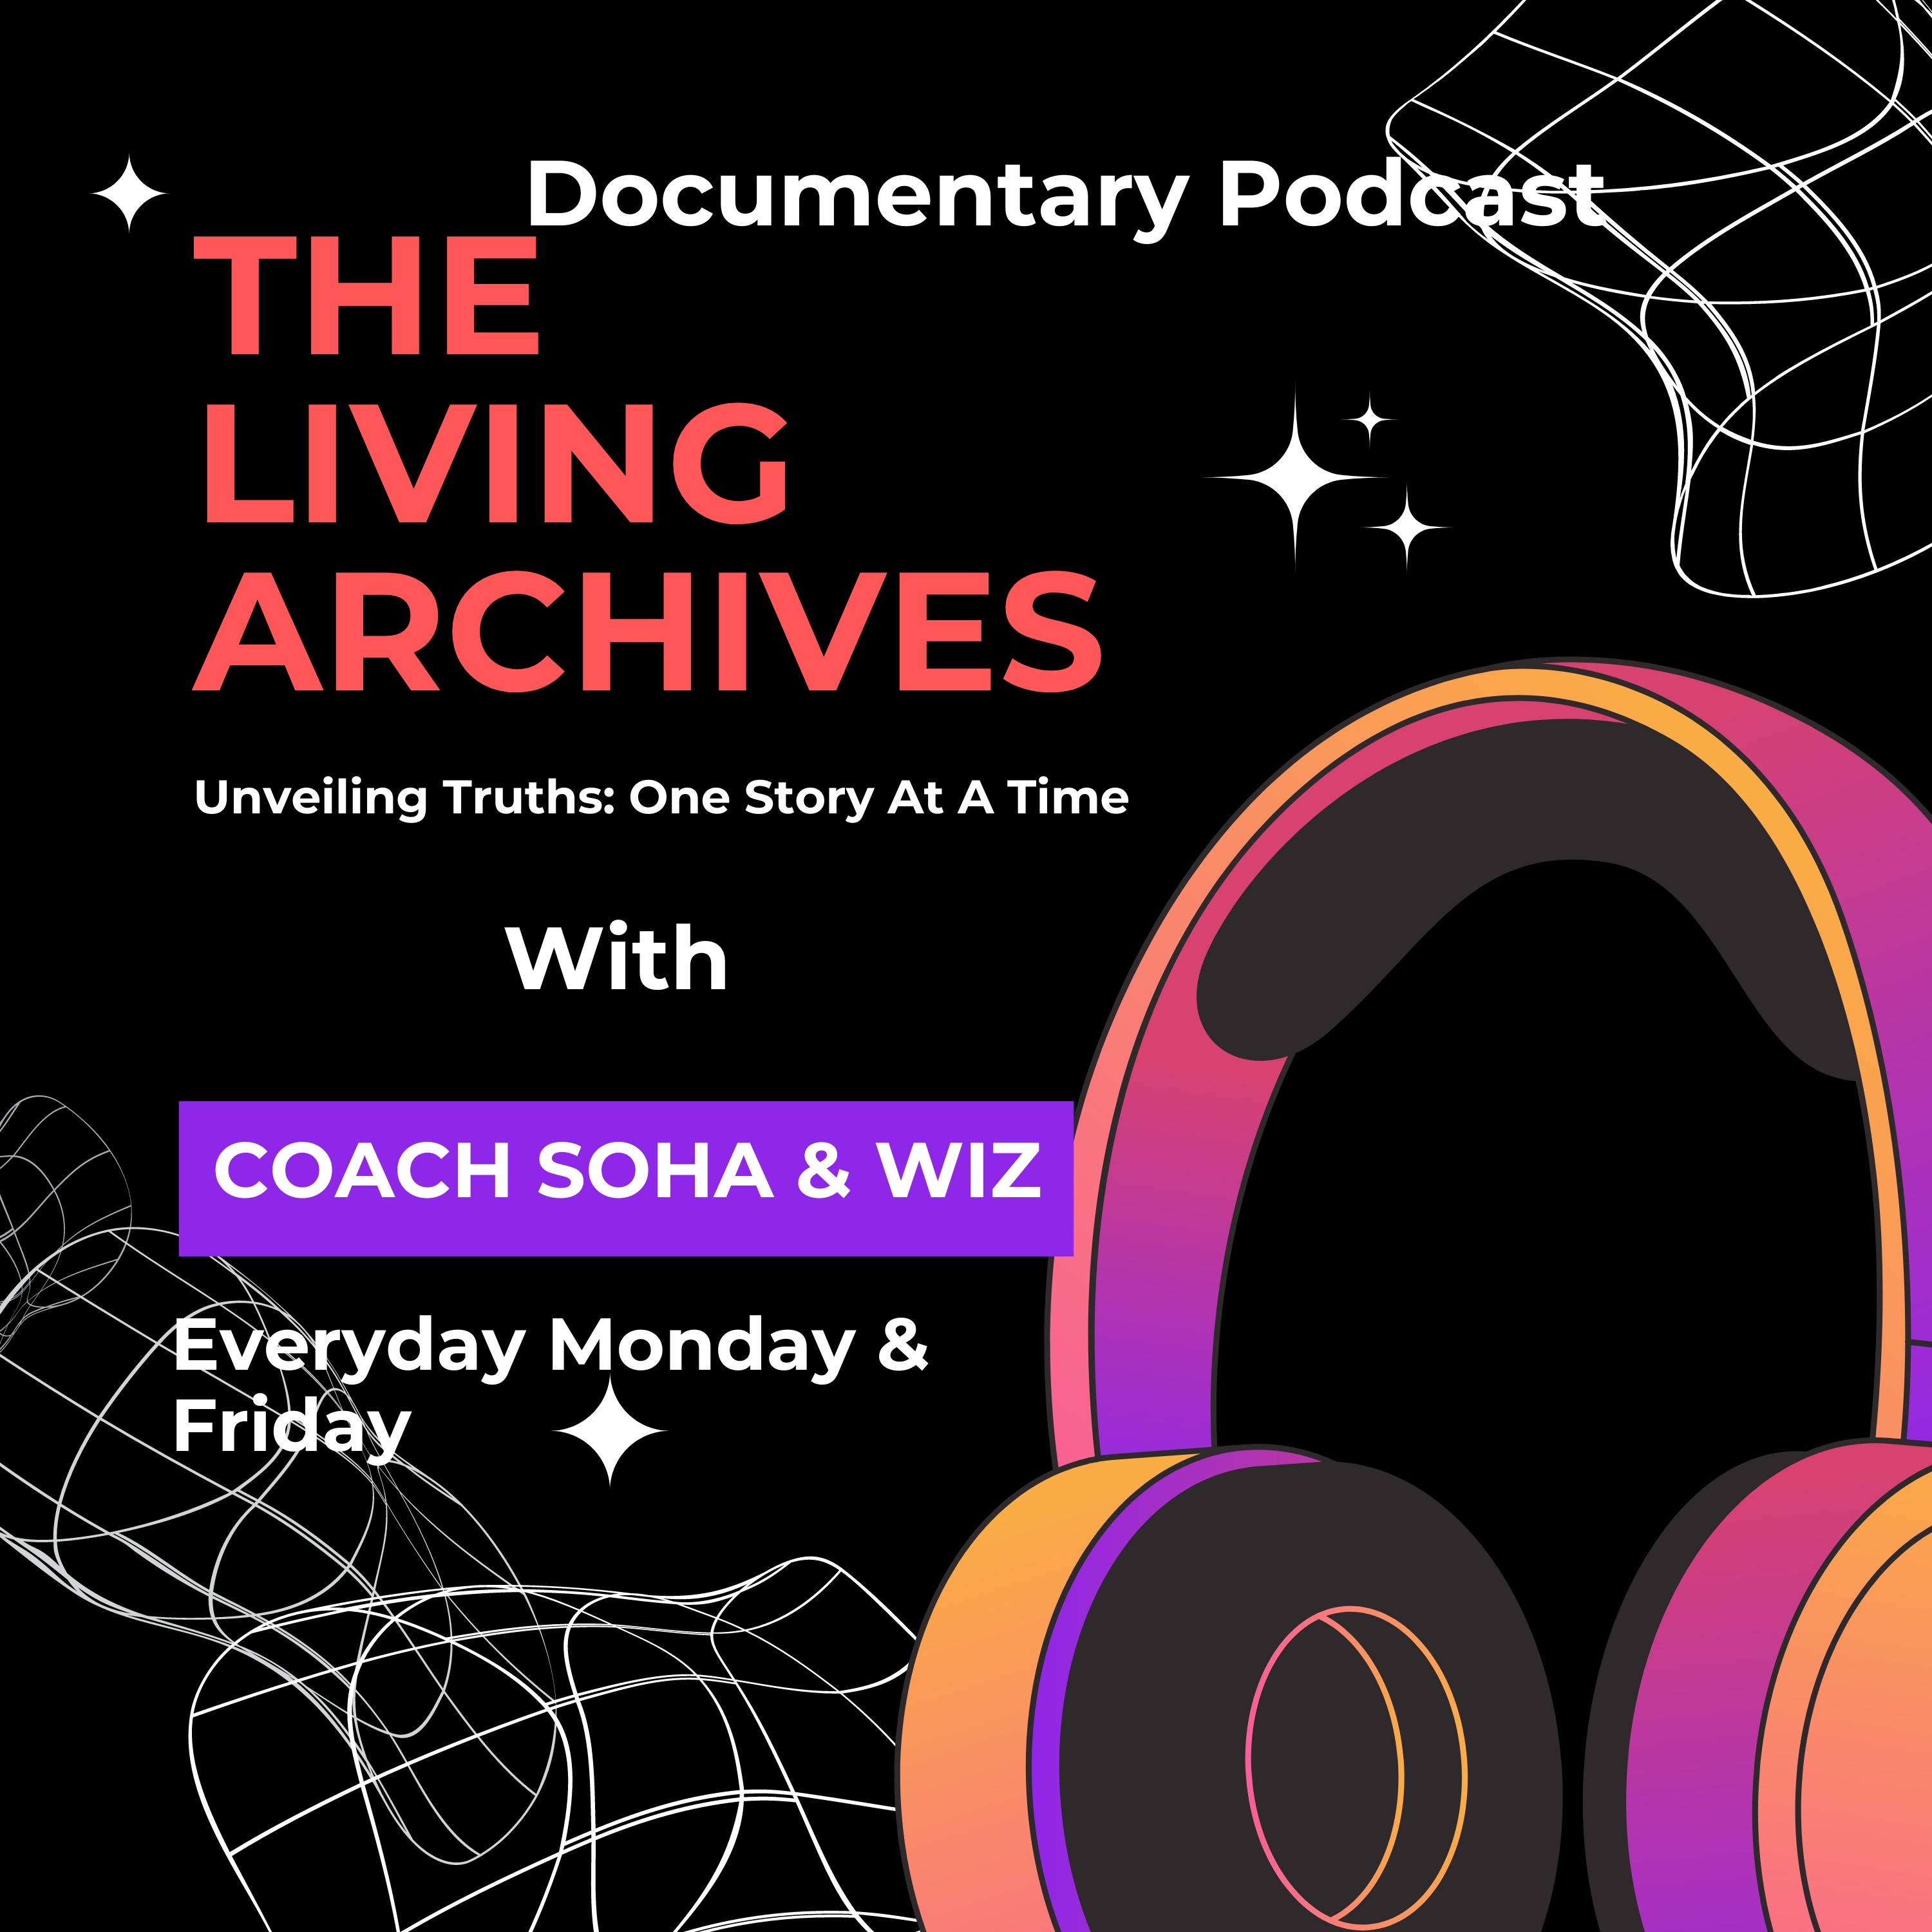 Artwork for the podcast The Living Archives